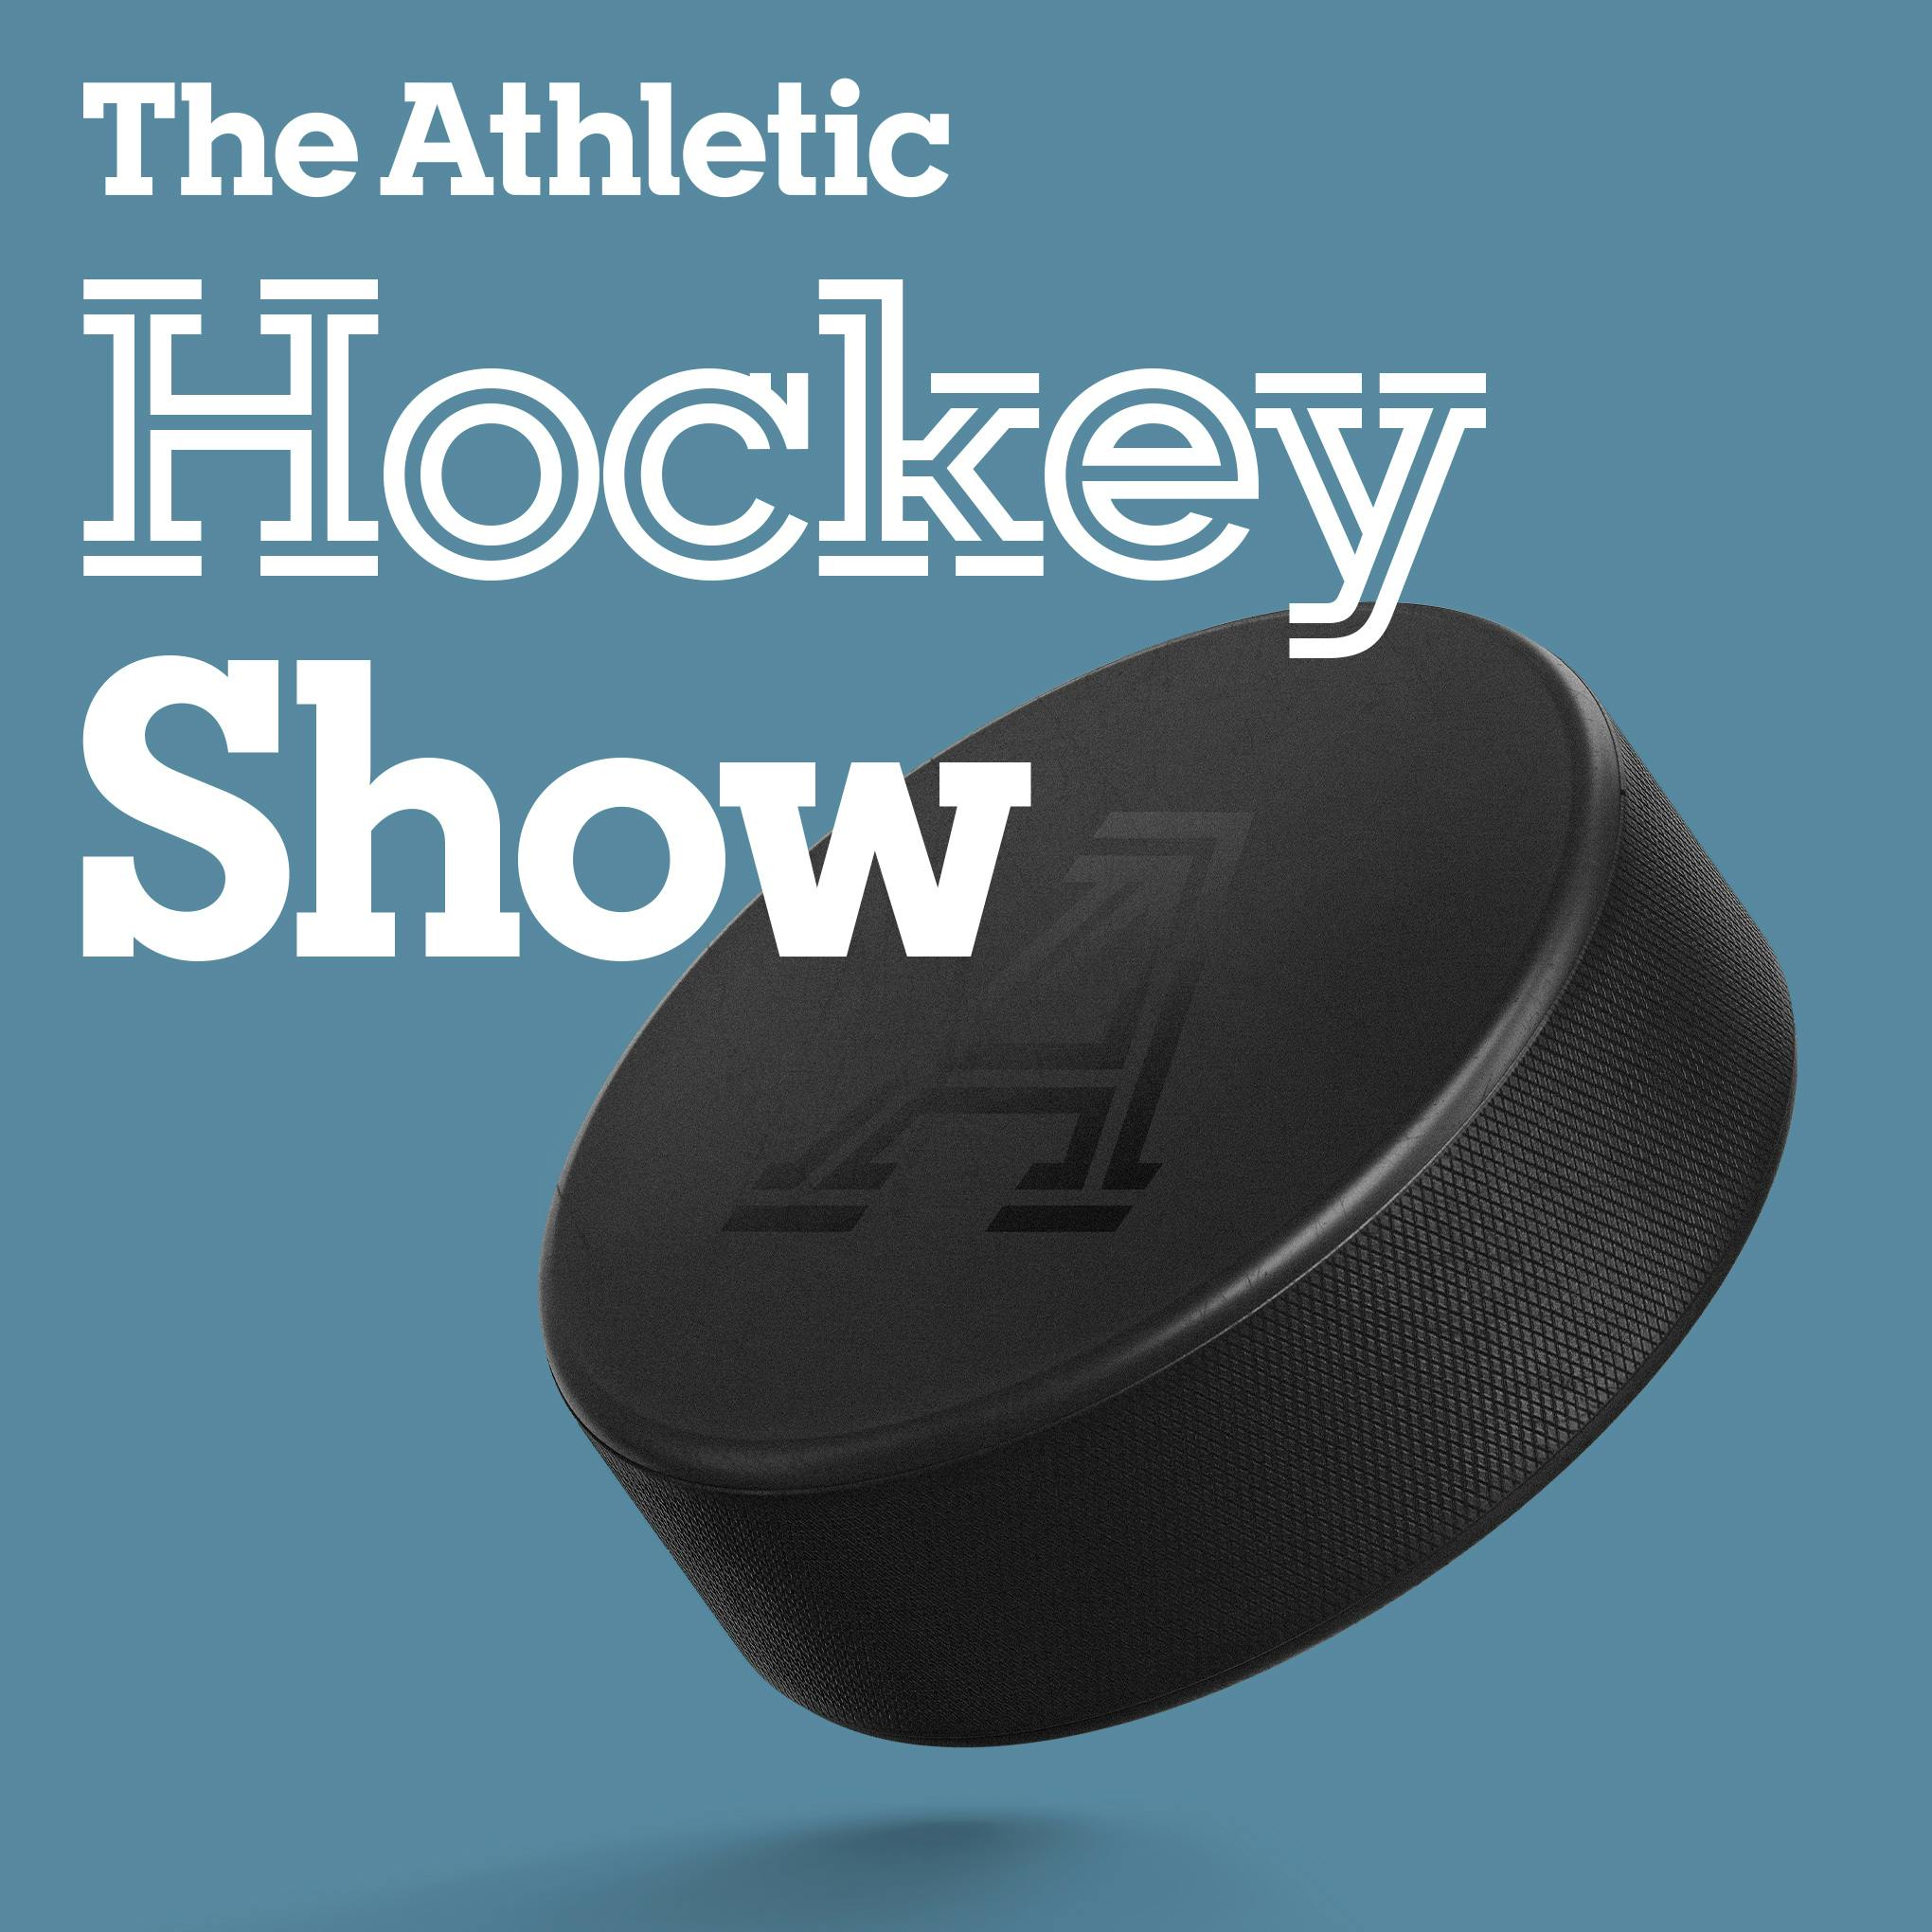 The Athletic Hockey Show podcast